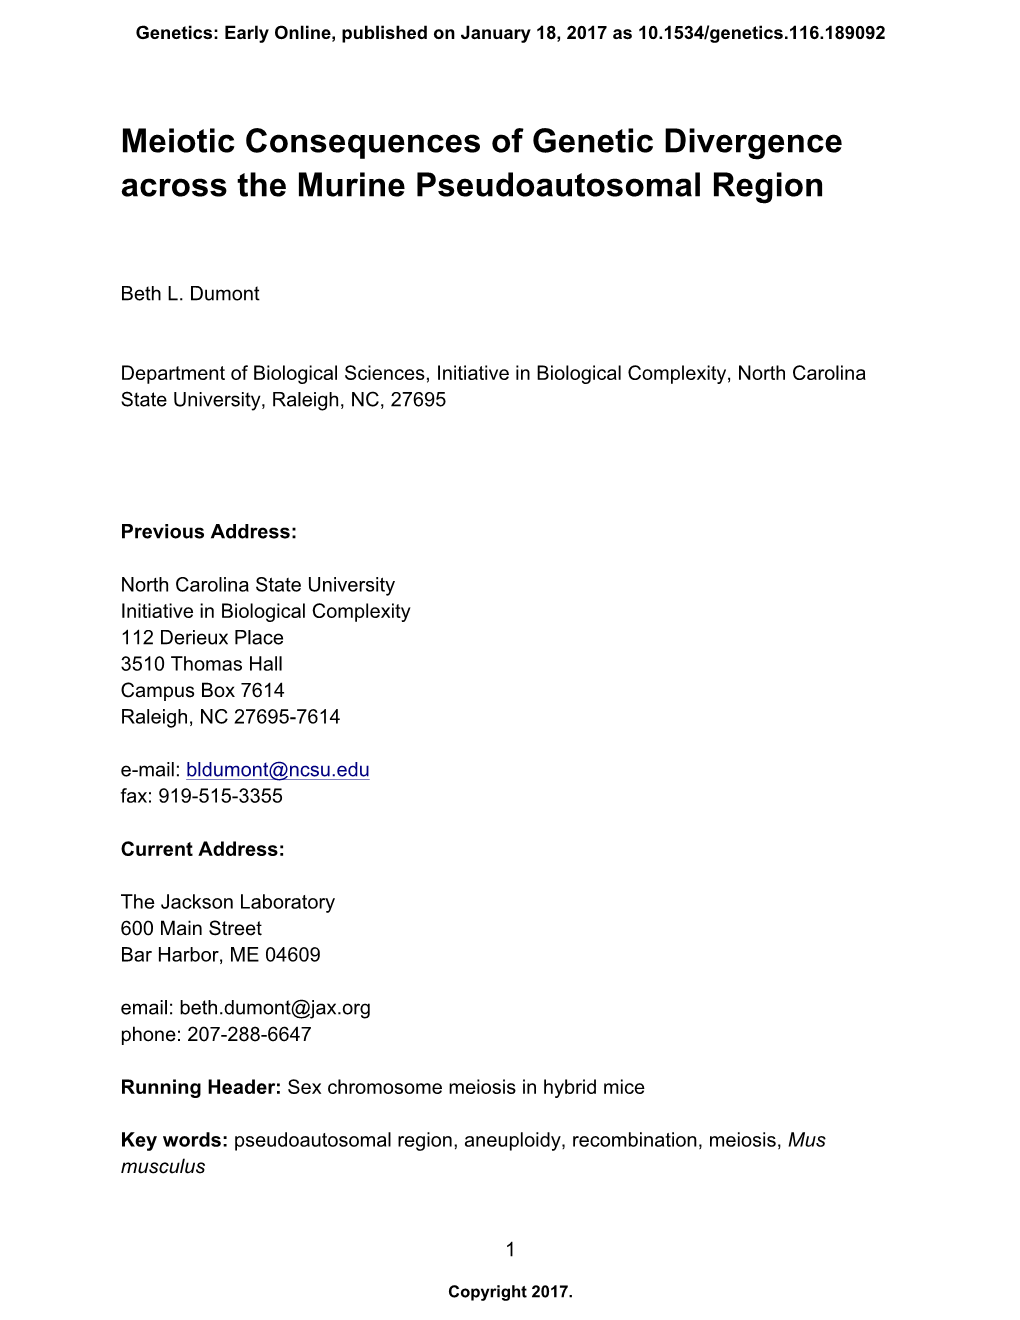 Meiotic Consequences of Genetic Divergence Across the Murine Pseudoautosomal Region